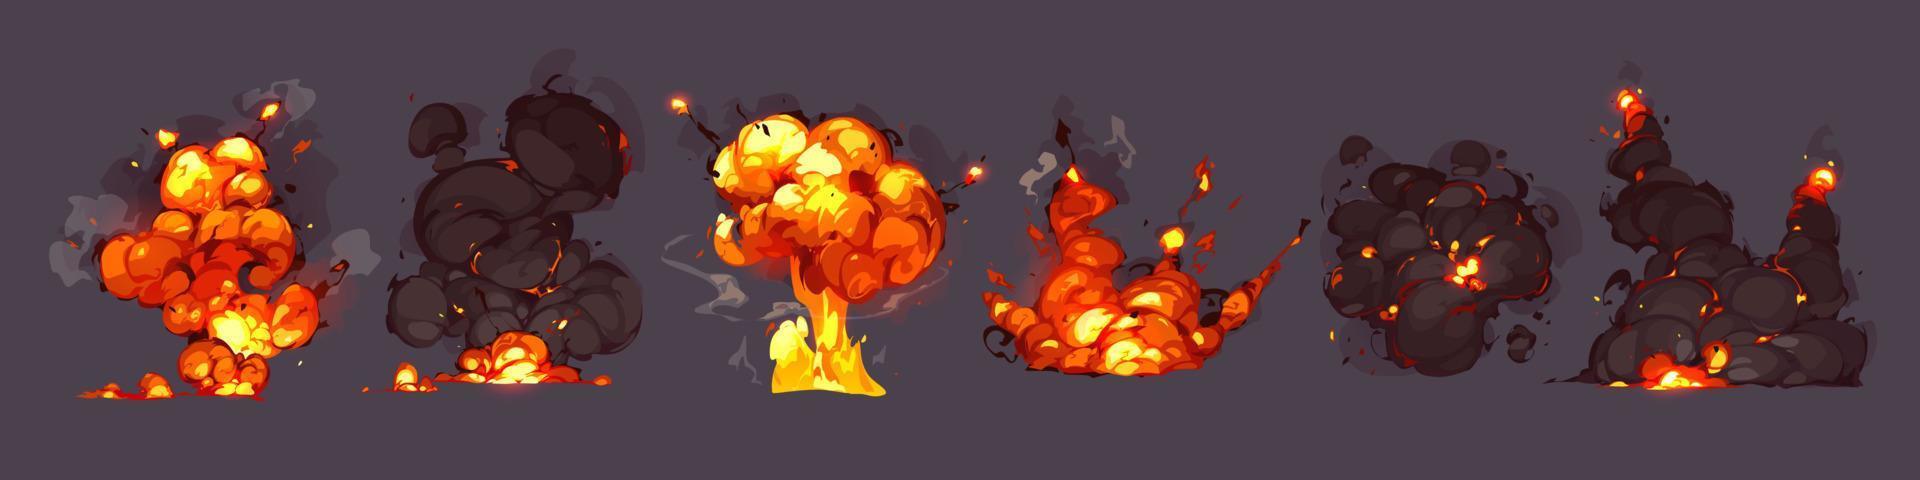 Bomb explosions, blasts with fire and smoke clouds vector